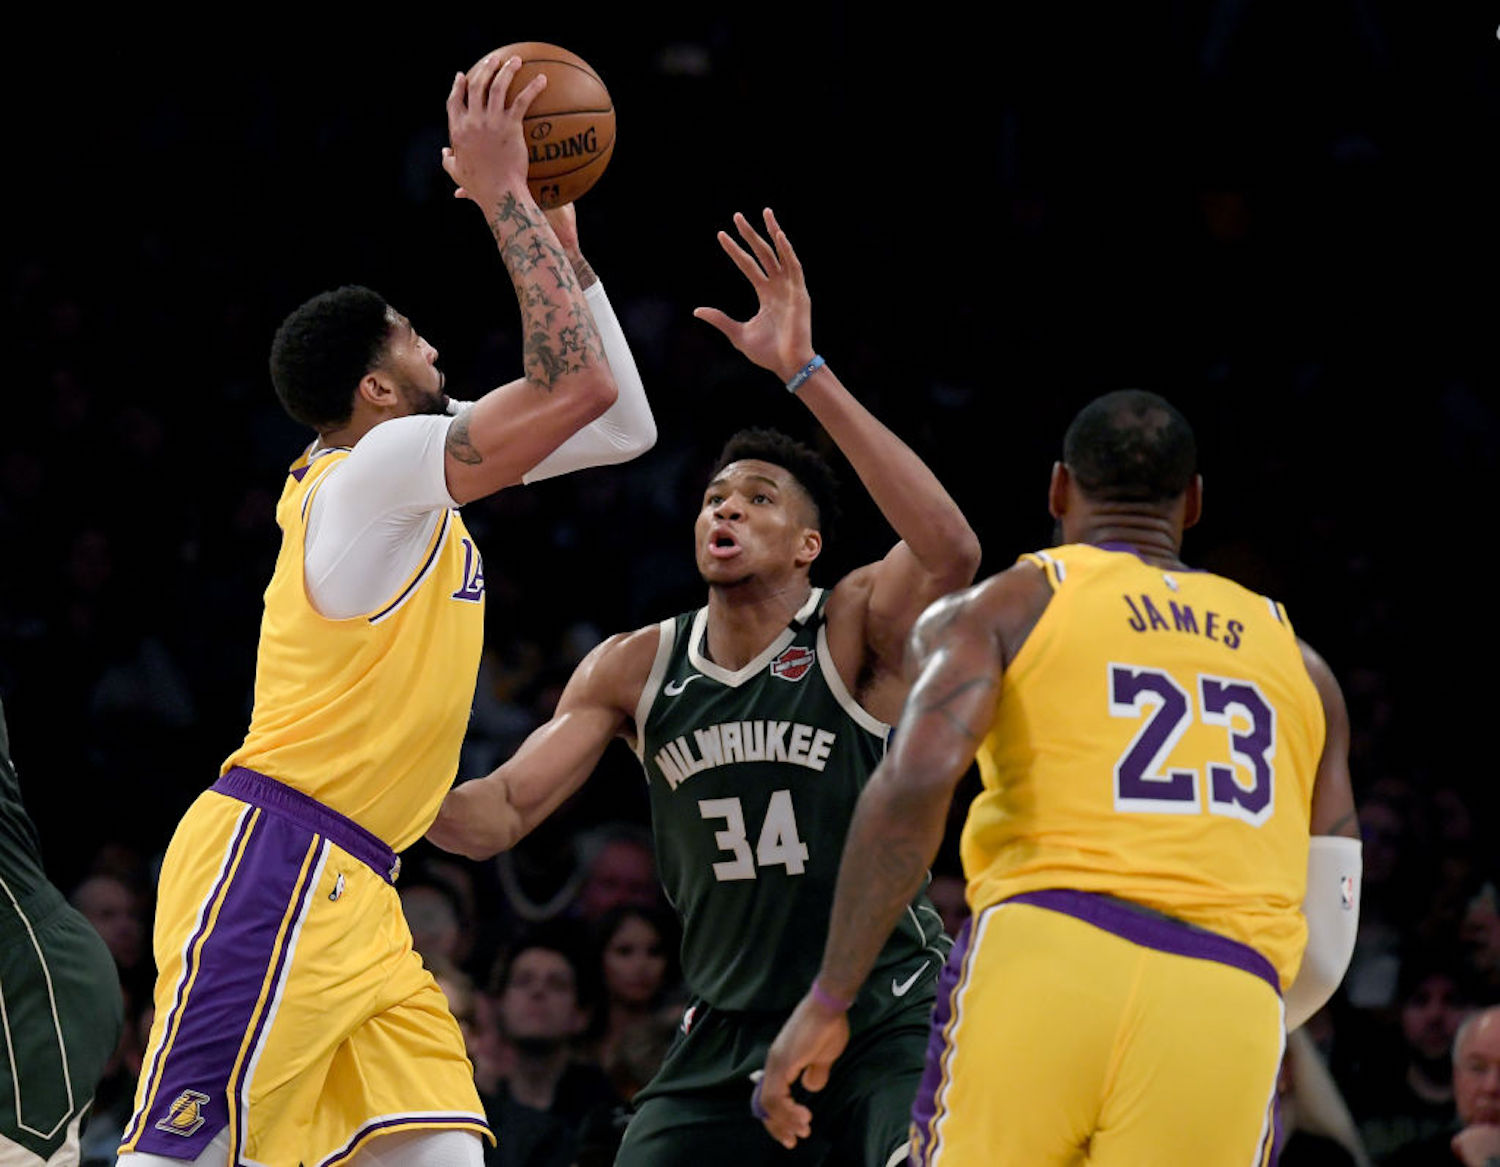 Anthony Davis has yet to sign an extension with the Lakers, but that could be apart of the team's master plan to sign Giannis Antetokounmpo.